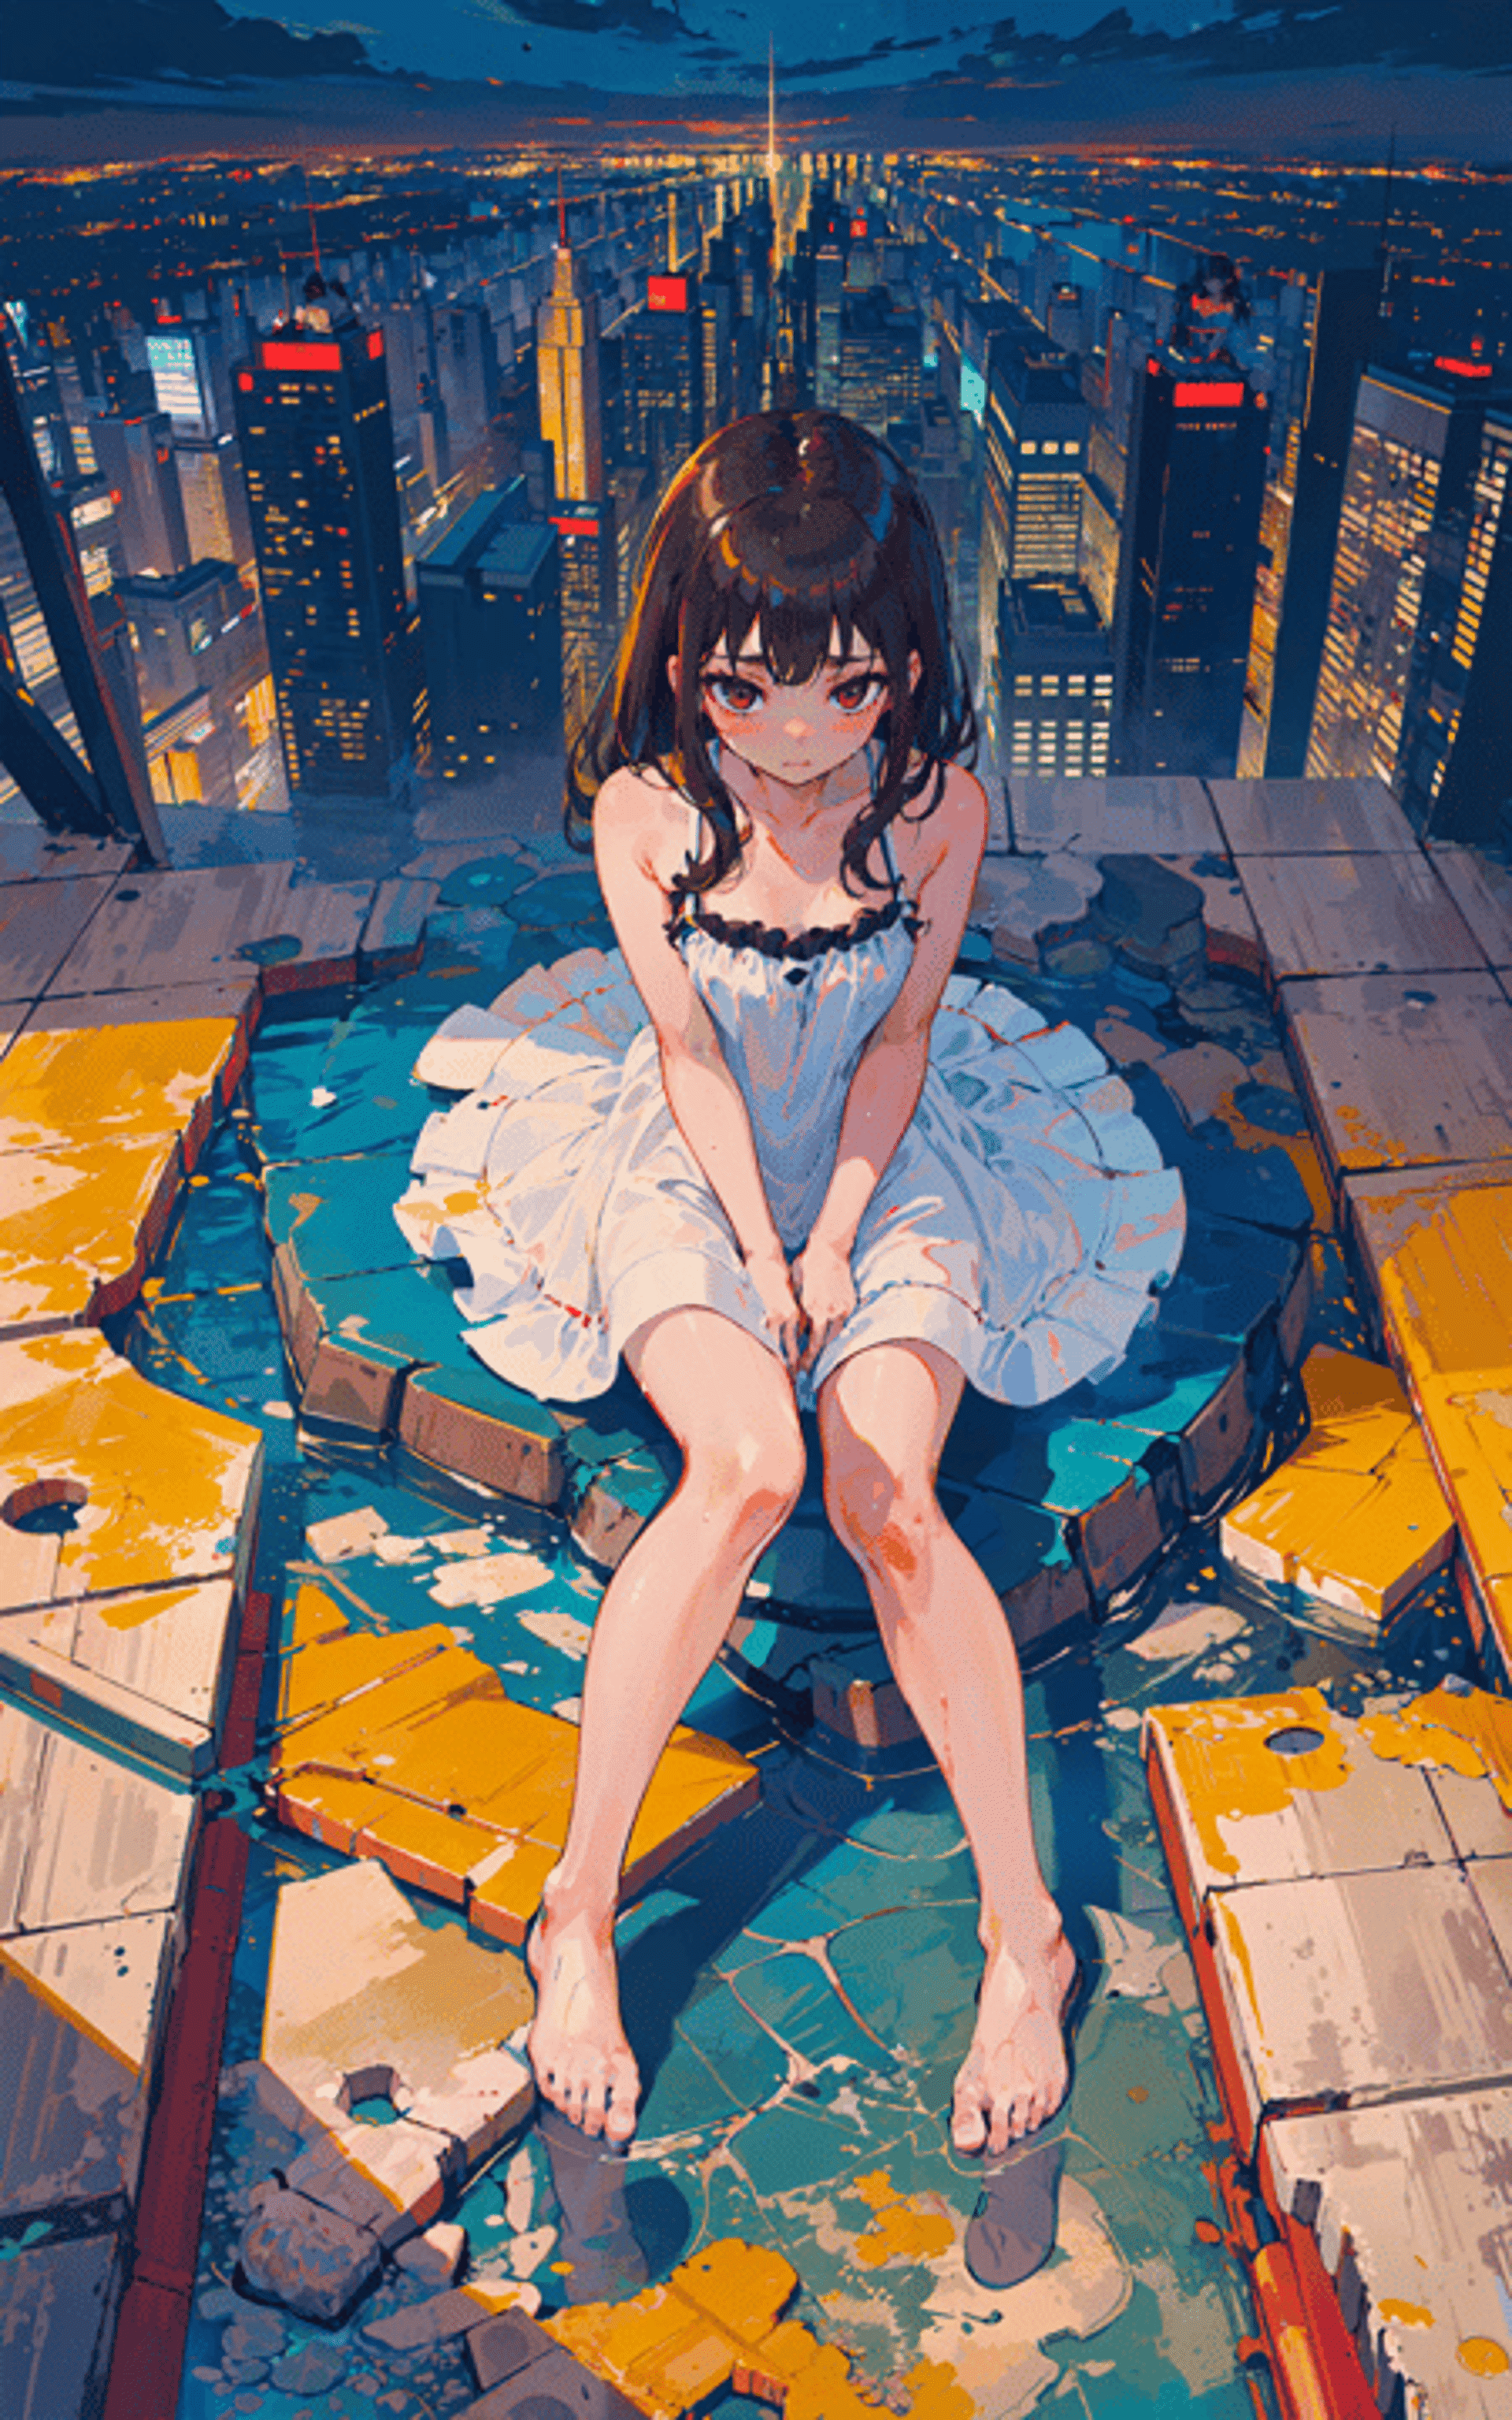 An anime character sitting on a yellow and blue object.